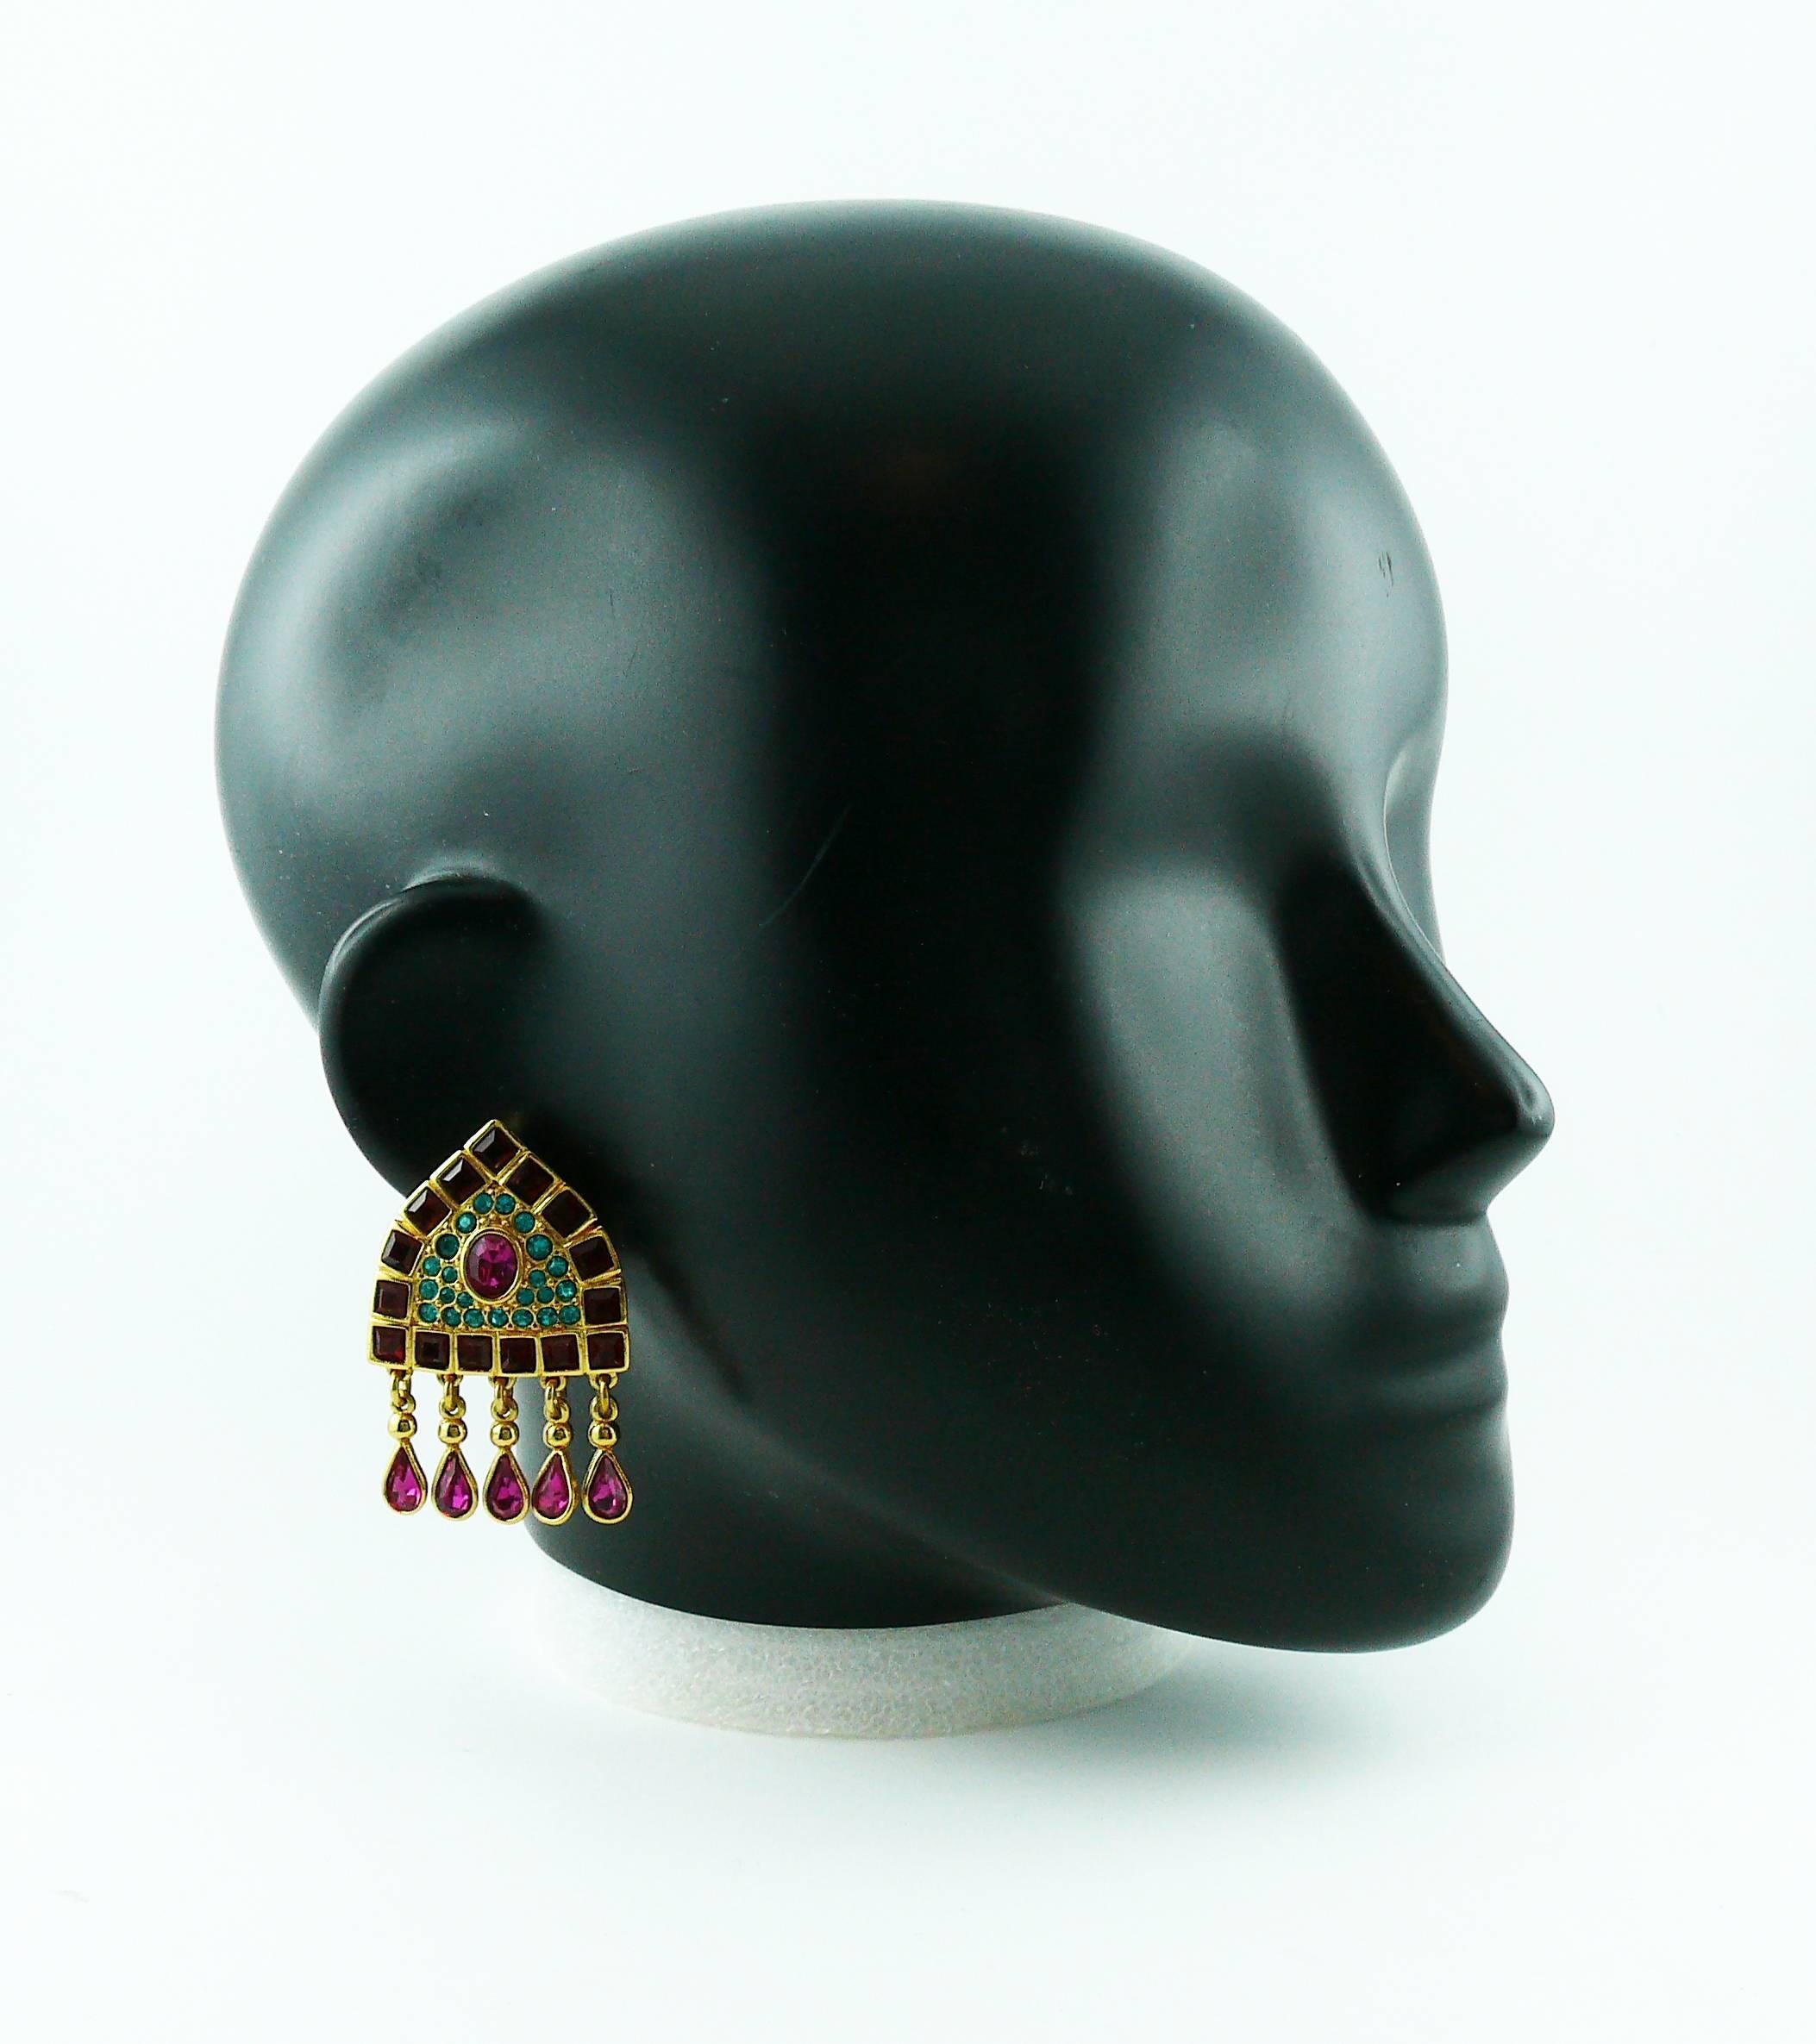 YVES SAINT LAURENT vintage Oriental inspired clip-on earrings featuring multicolored crystals in a gold toned setting.

Marked YSL Made in France.

Indicative measurements : height approx. 5 cm (1.97 inches) / width approx. 3.3 cm (1.30